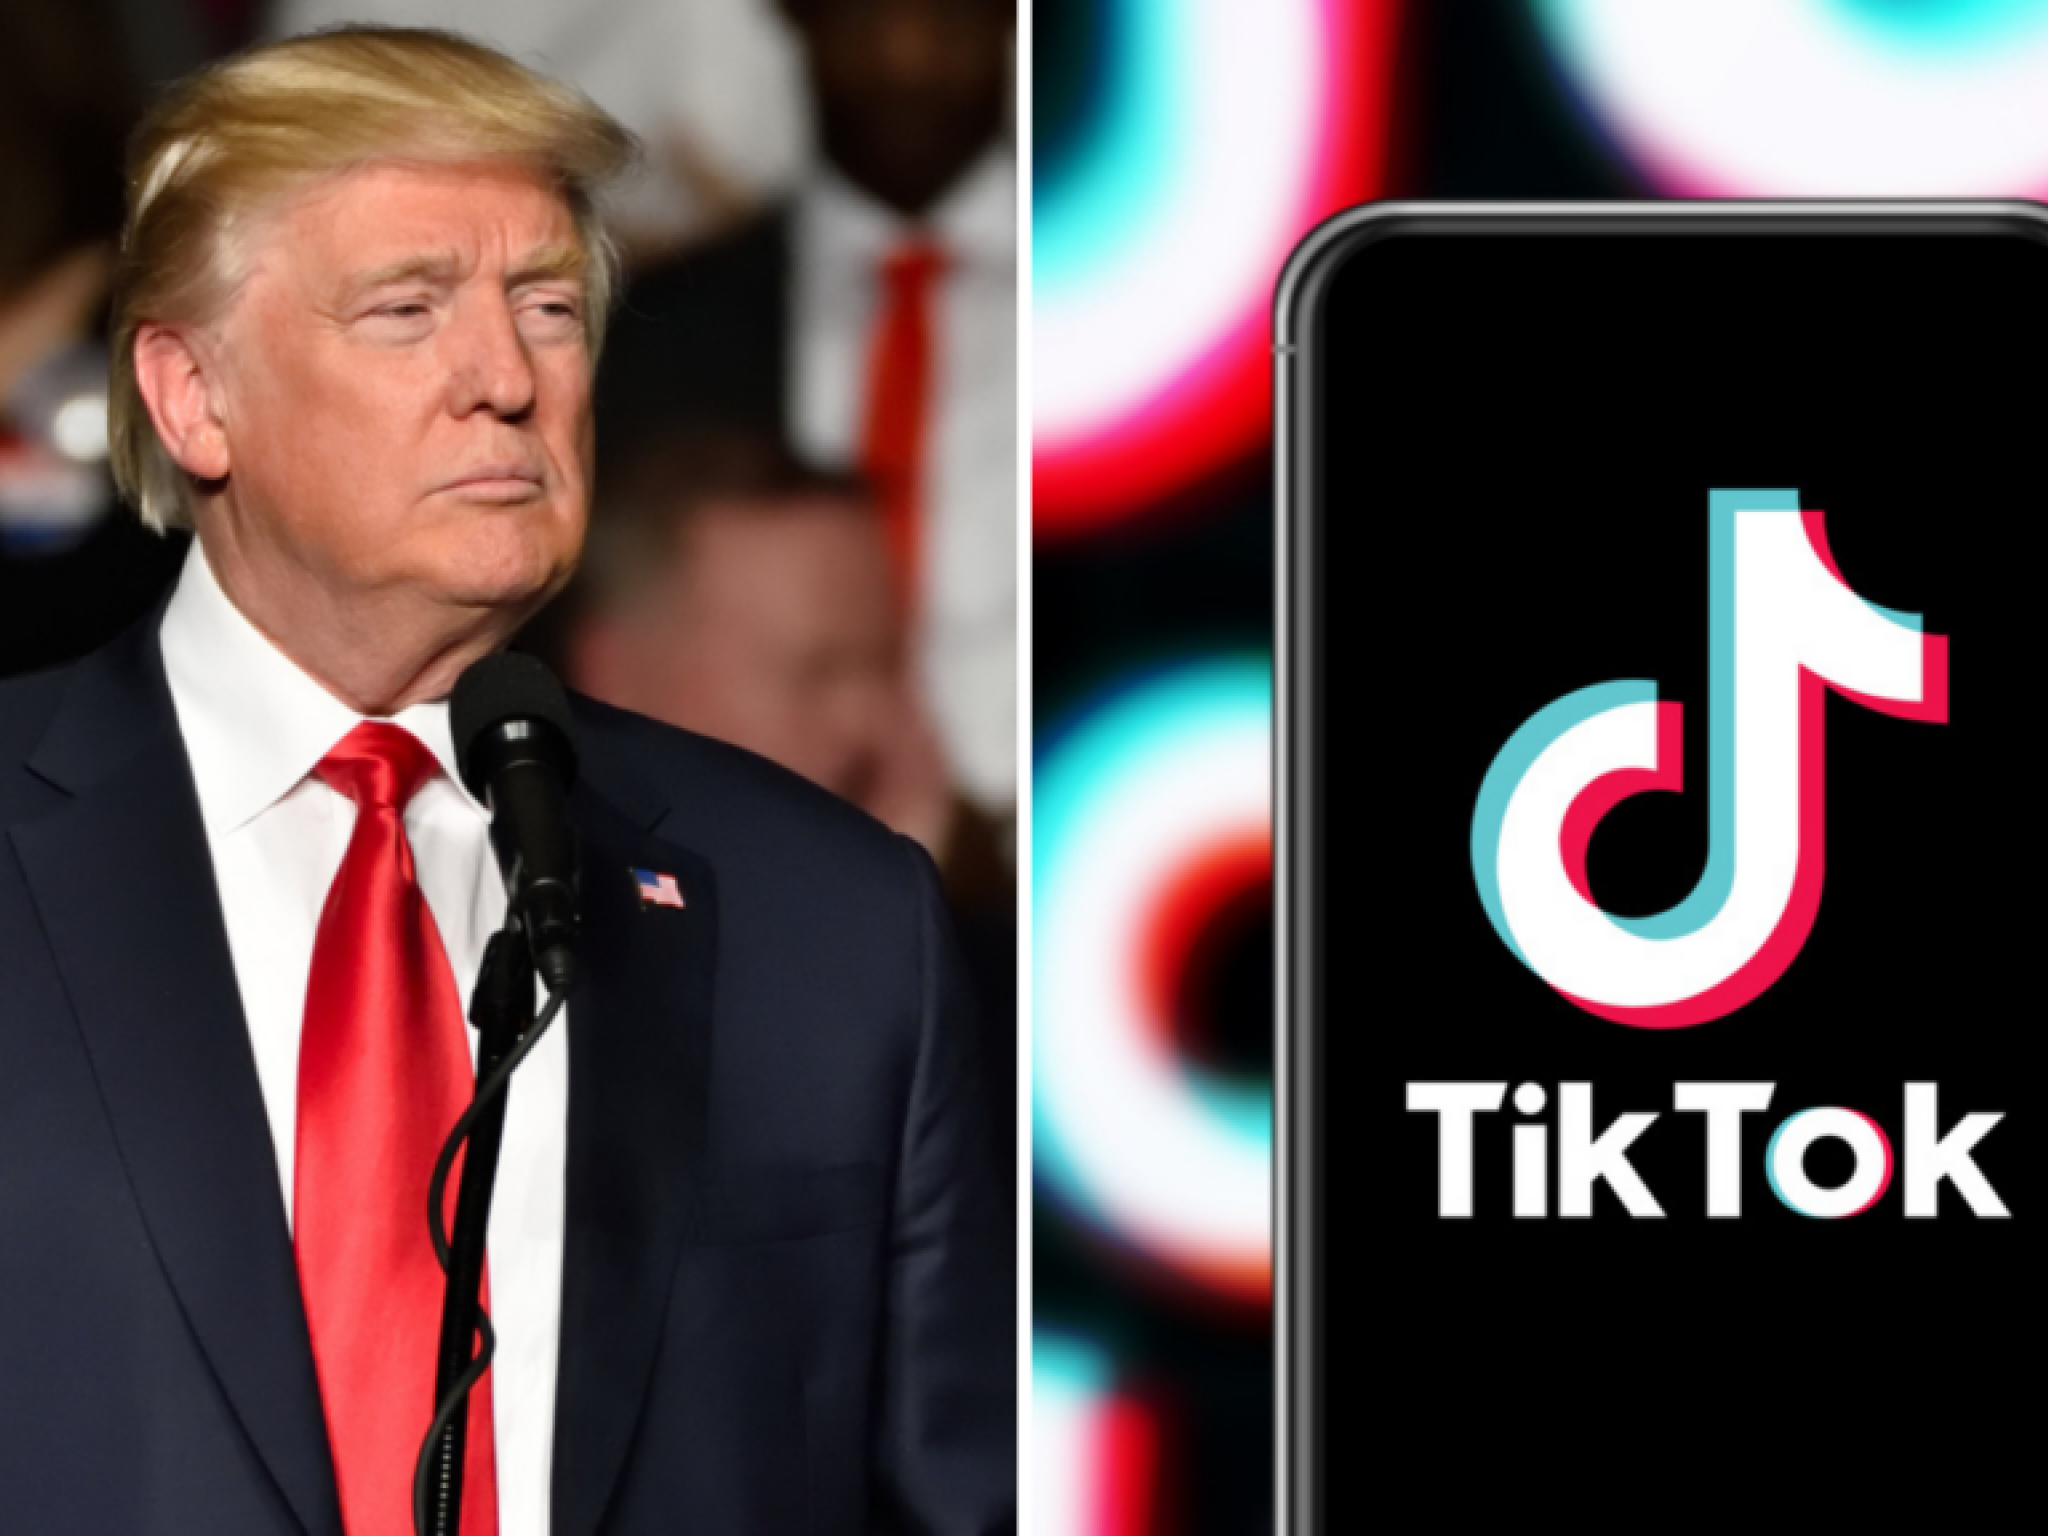  why-did-donald-trump-change-his-mind-about-tiktok-follow-the-money-says-rep-nancy-pelosi 